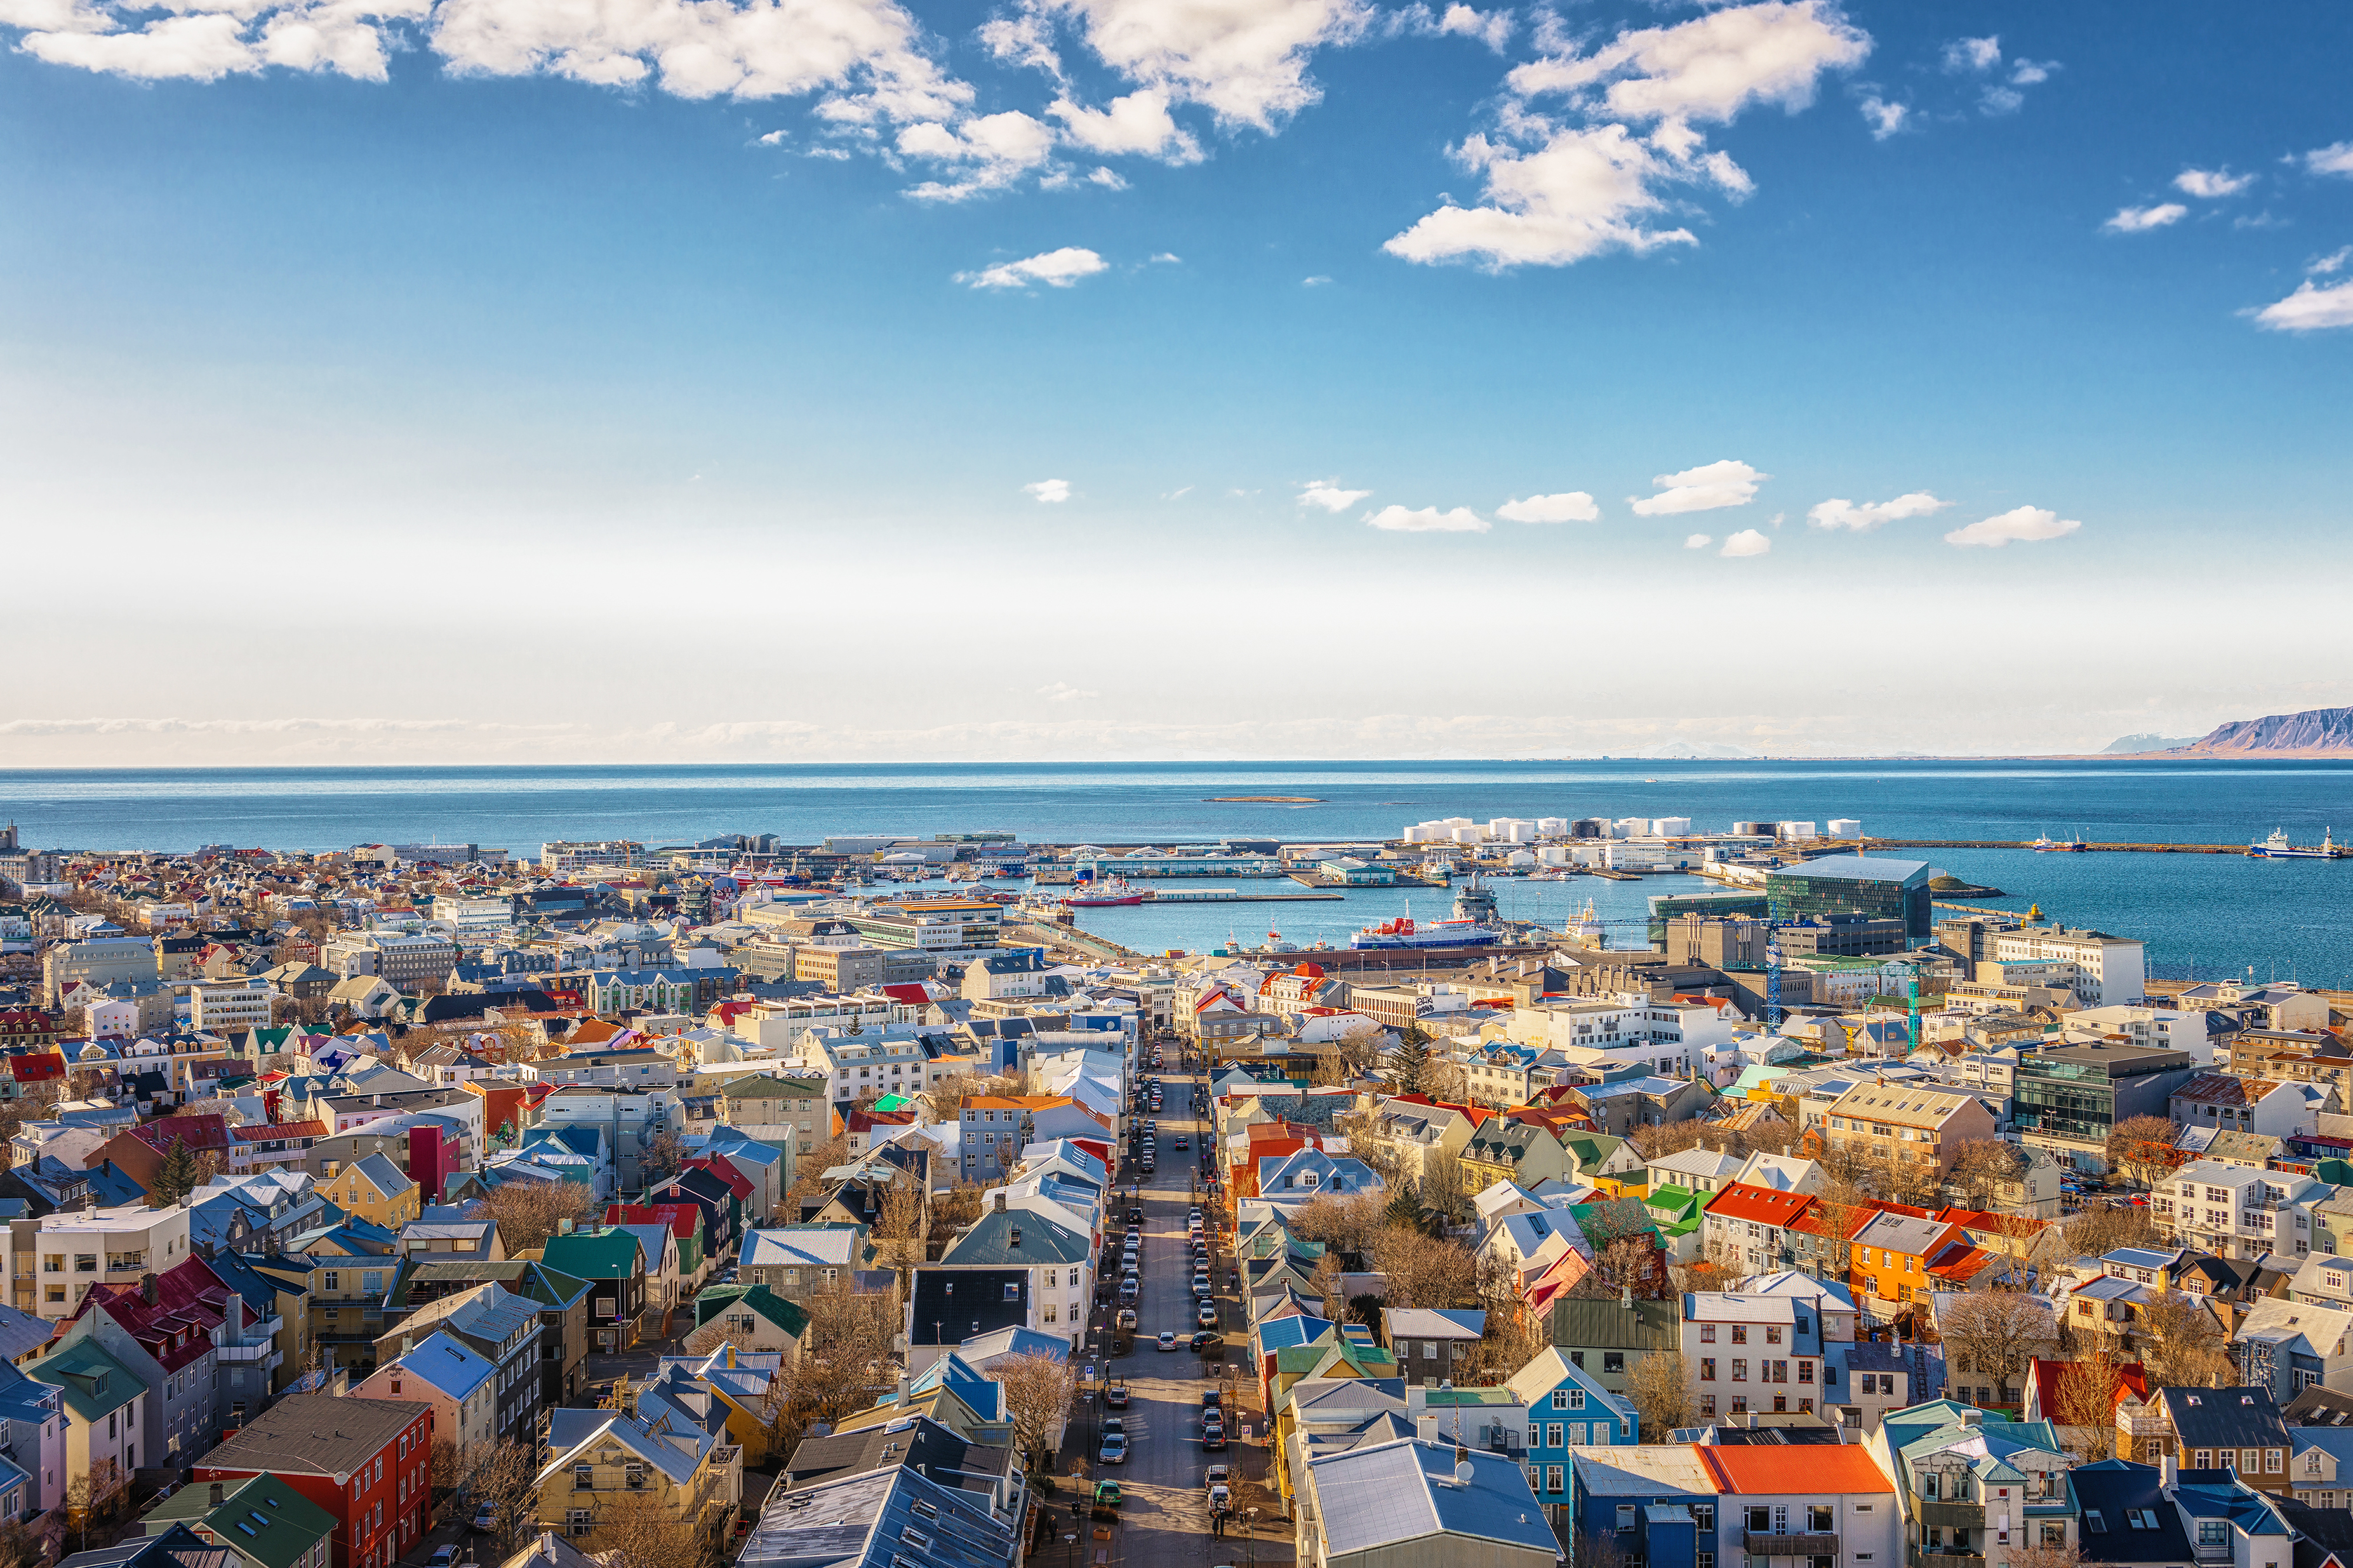 Reykjavik, a great city to move to Iceland for permanent residence